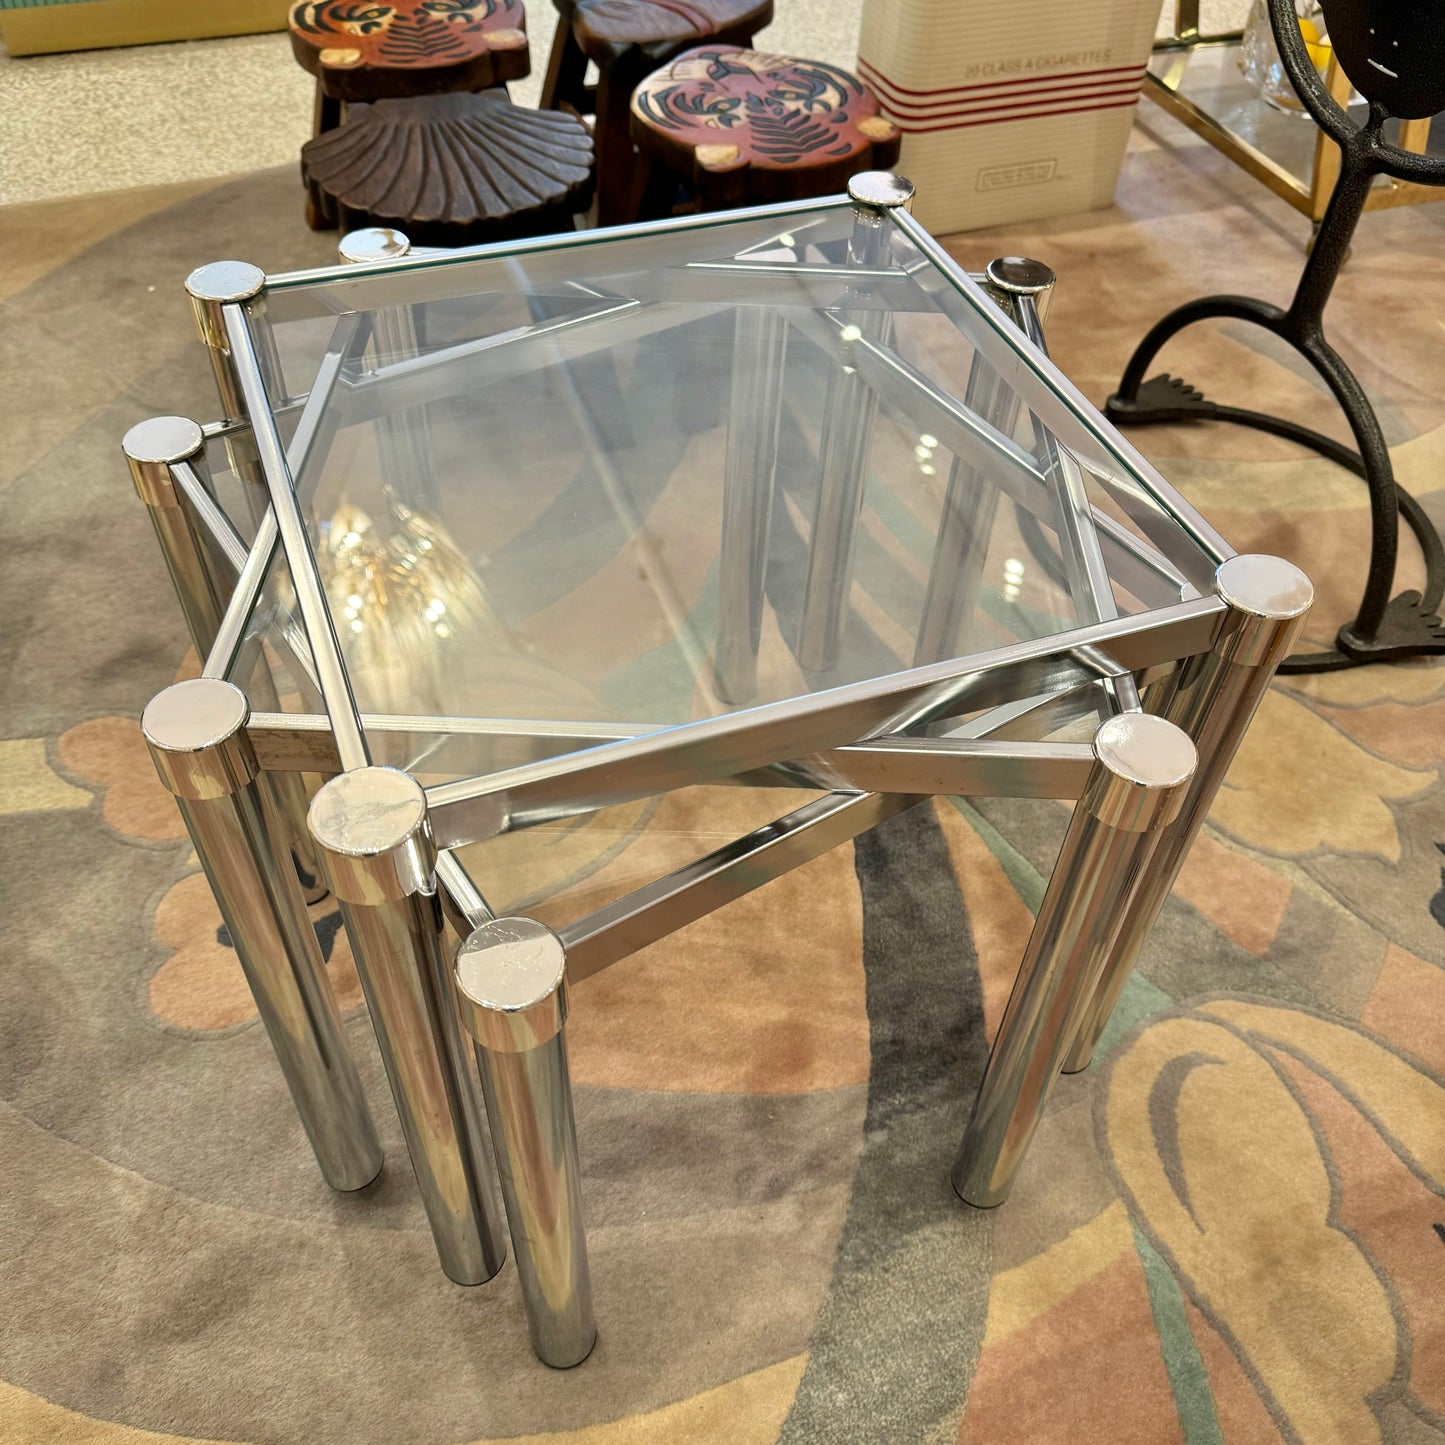 Set of 3 Vintage Chrome and Glass Stacking Tables